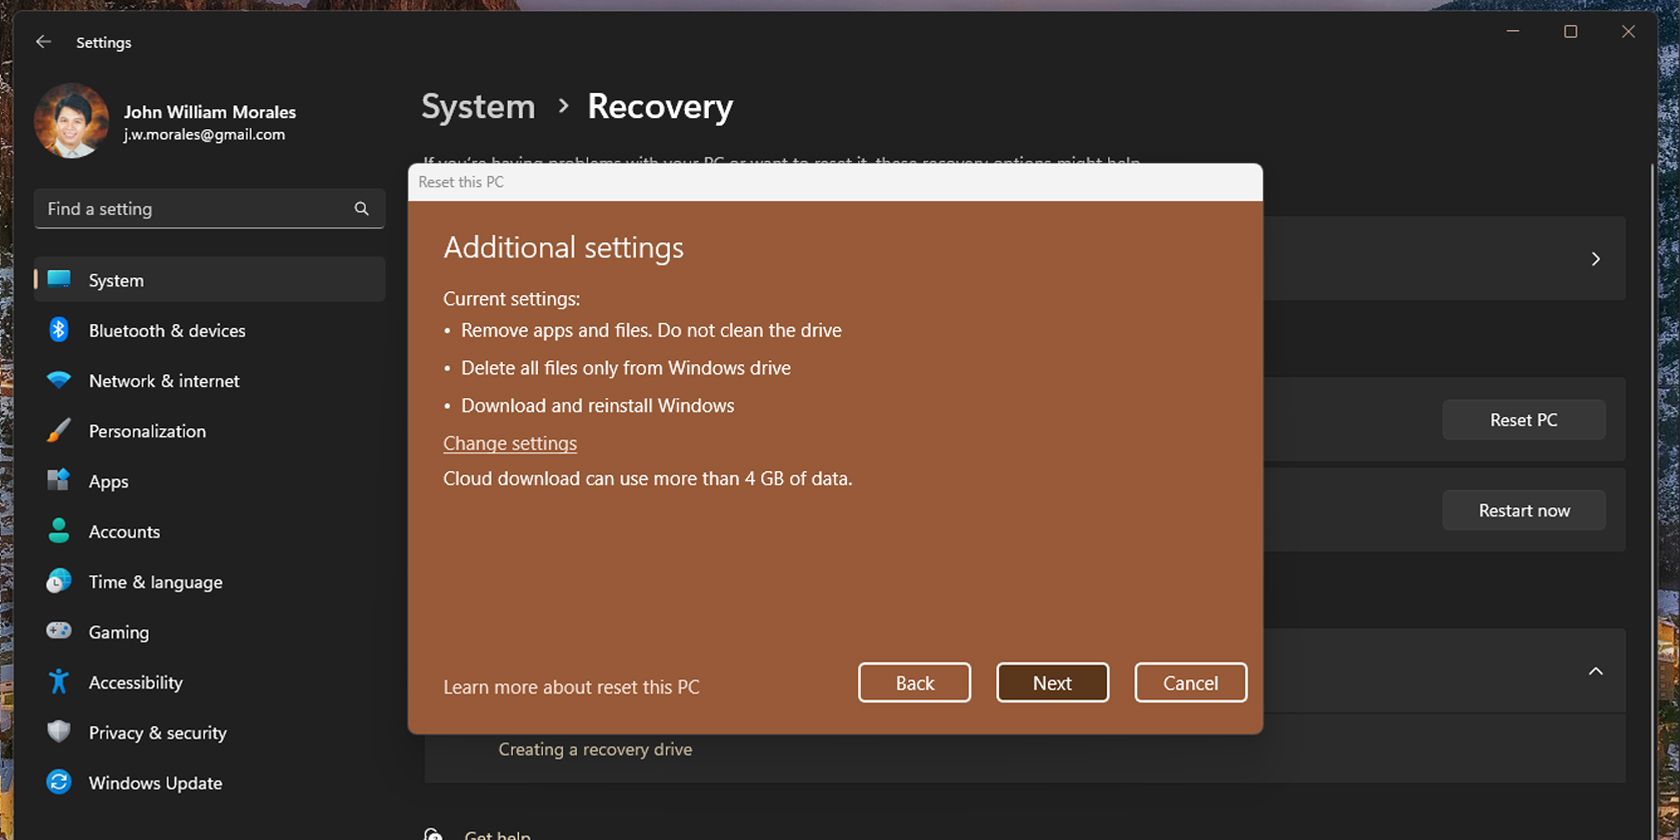 Reset this PC additional settings